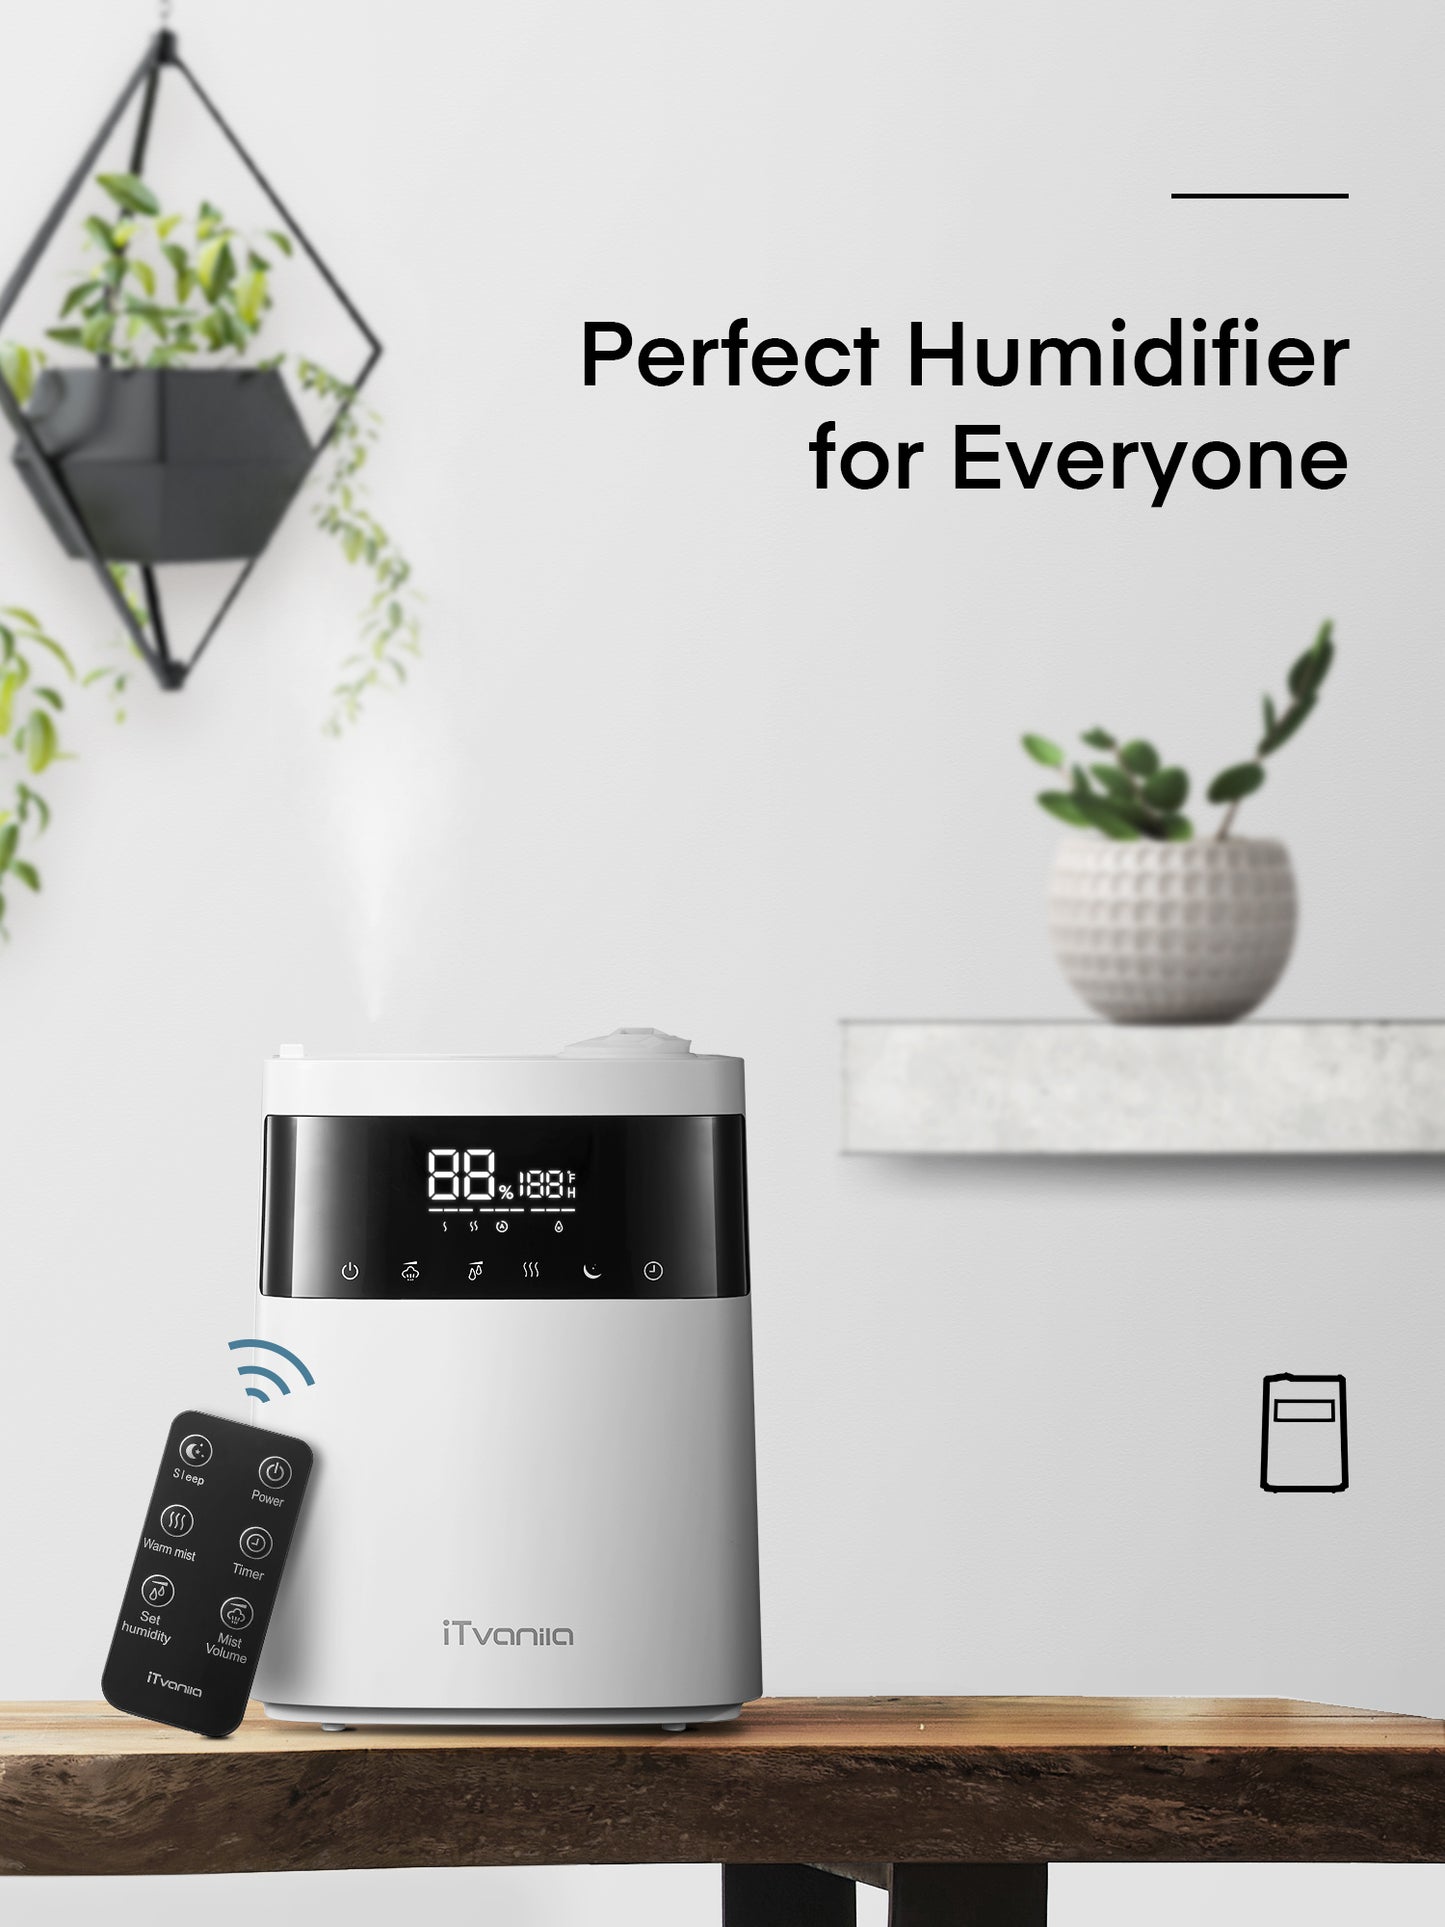 iTvanila Humidifiers for Bedroom Large Room, 5.5L Top Fill Cool and Warm Mist Humidifier for Families Plants with Essential Oil Built-in Humidity Sensor, Humidifiers with Timer Setting Last up to 55 Hours for Baby Room and Office White